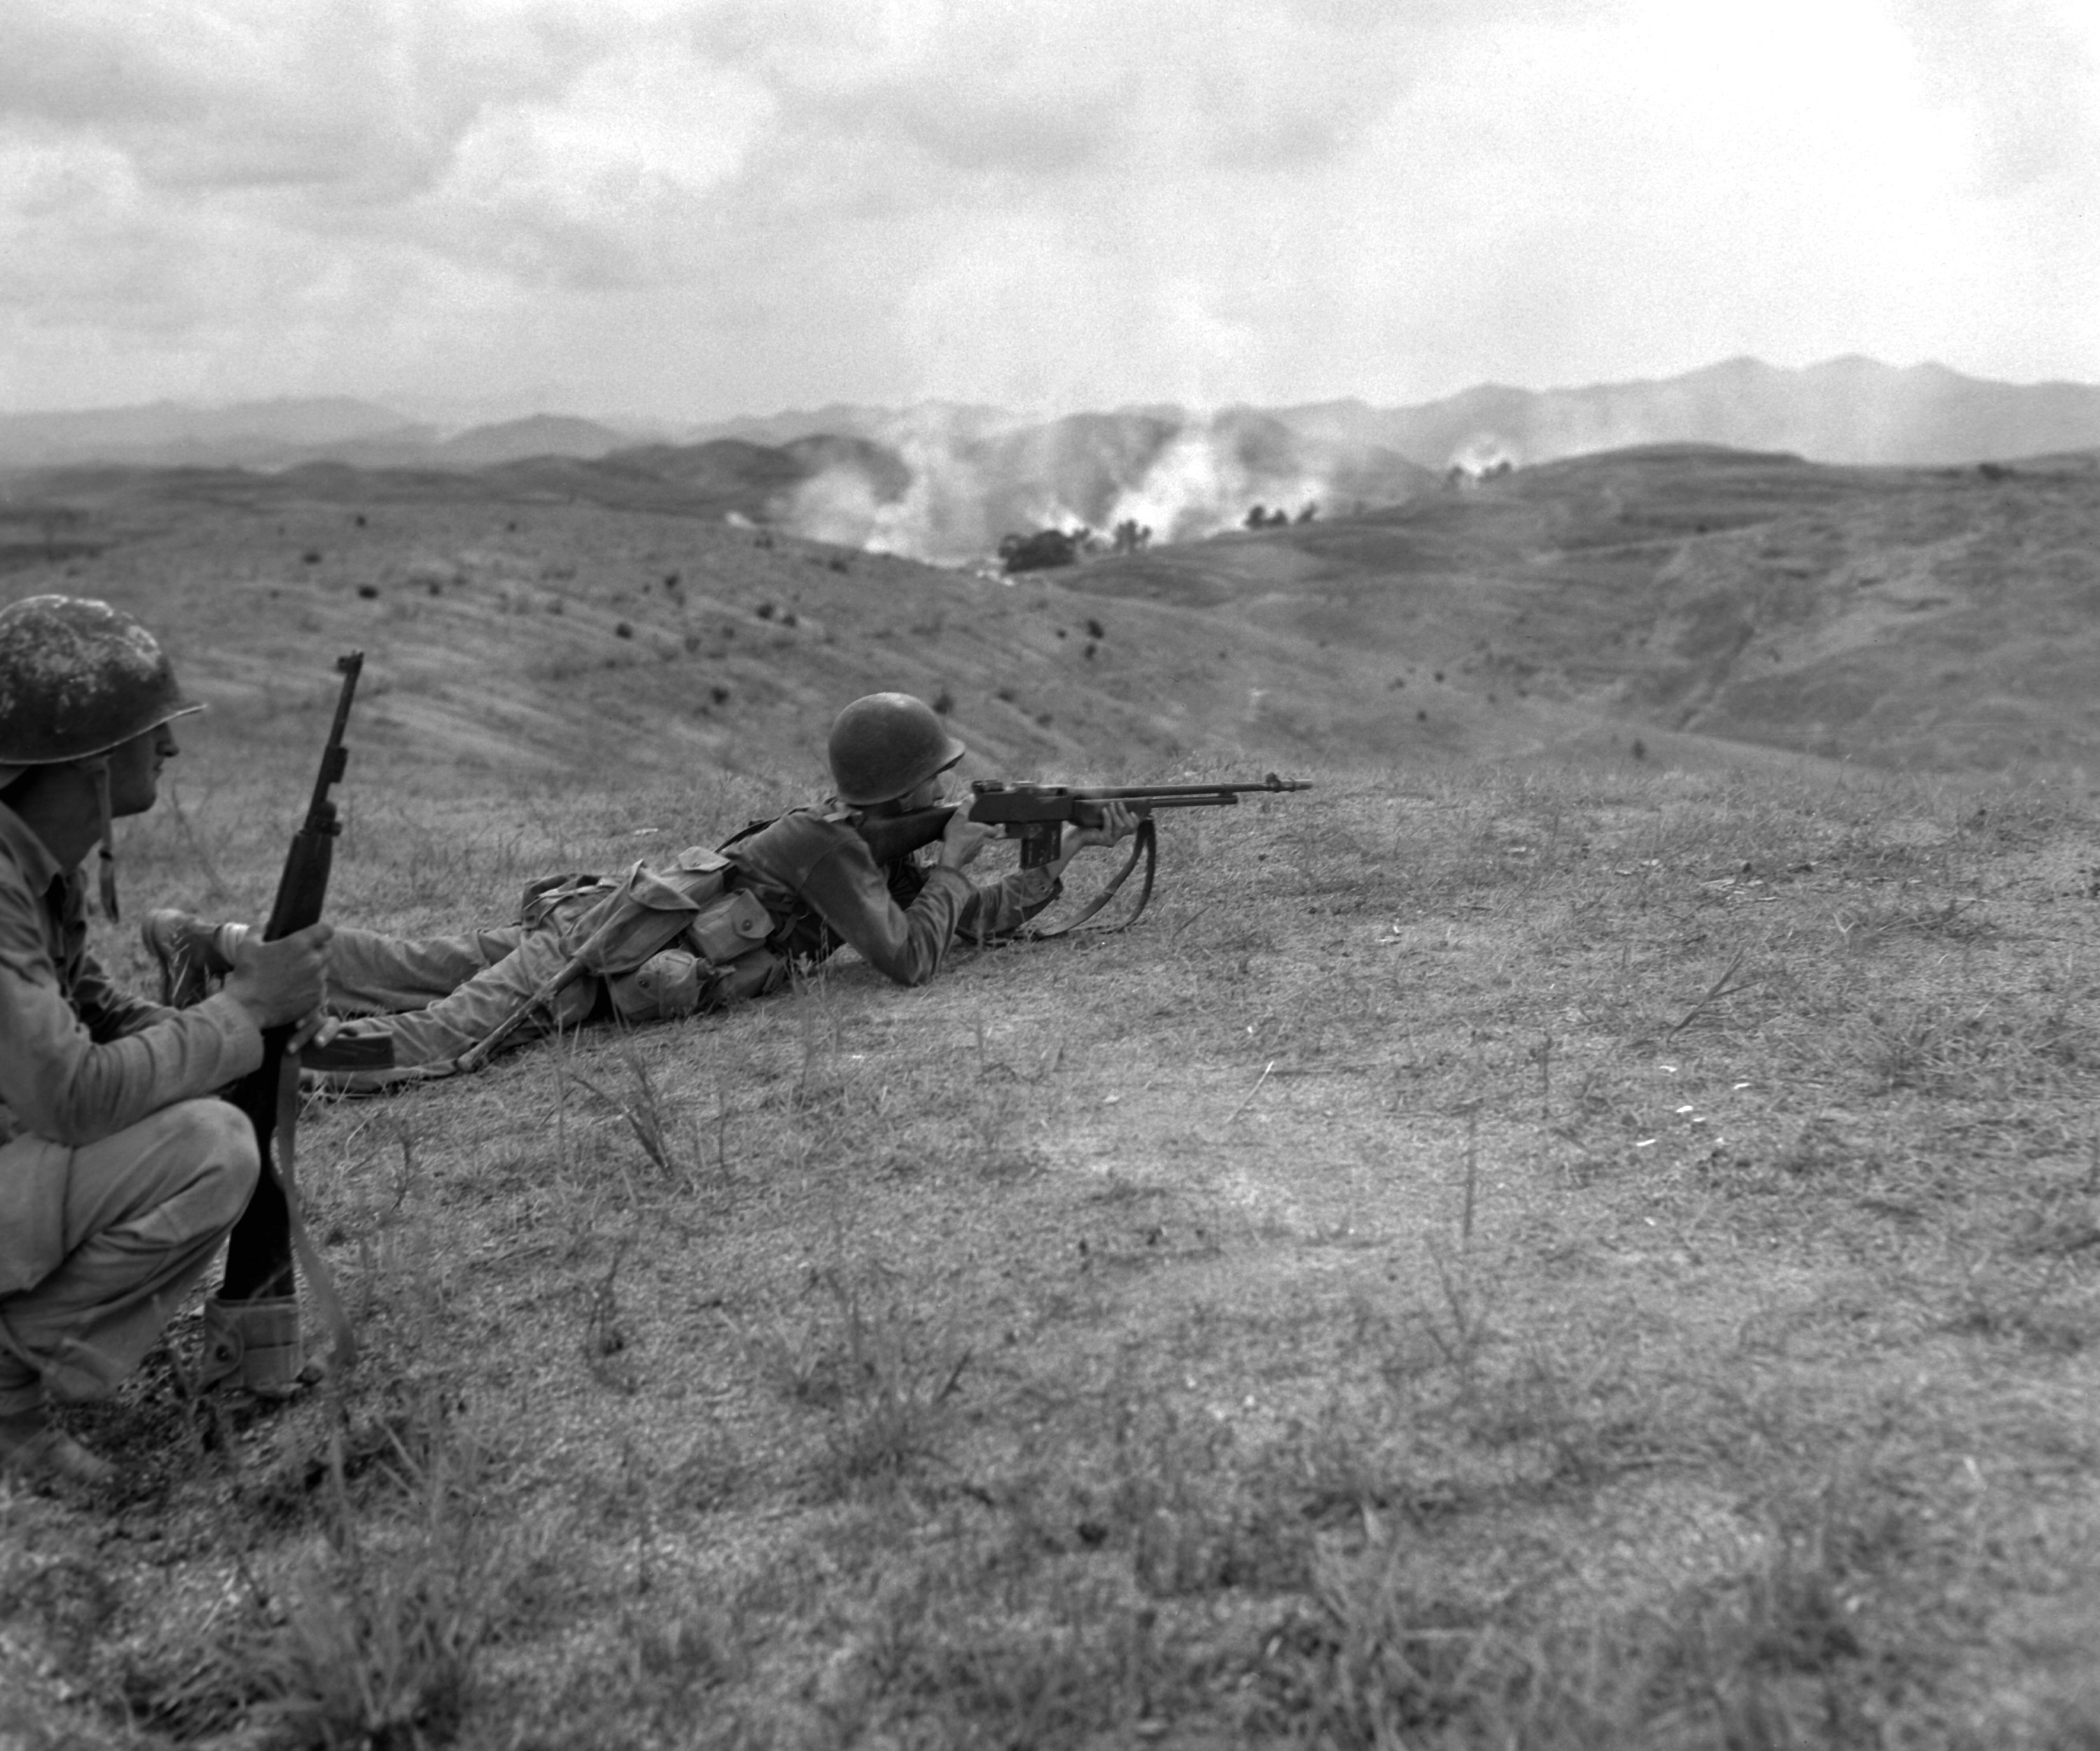 soldiers, war, monochrome, historic, M1A1 carbine, Browning Automatic Rifle - desktop wallpaper